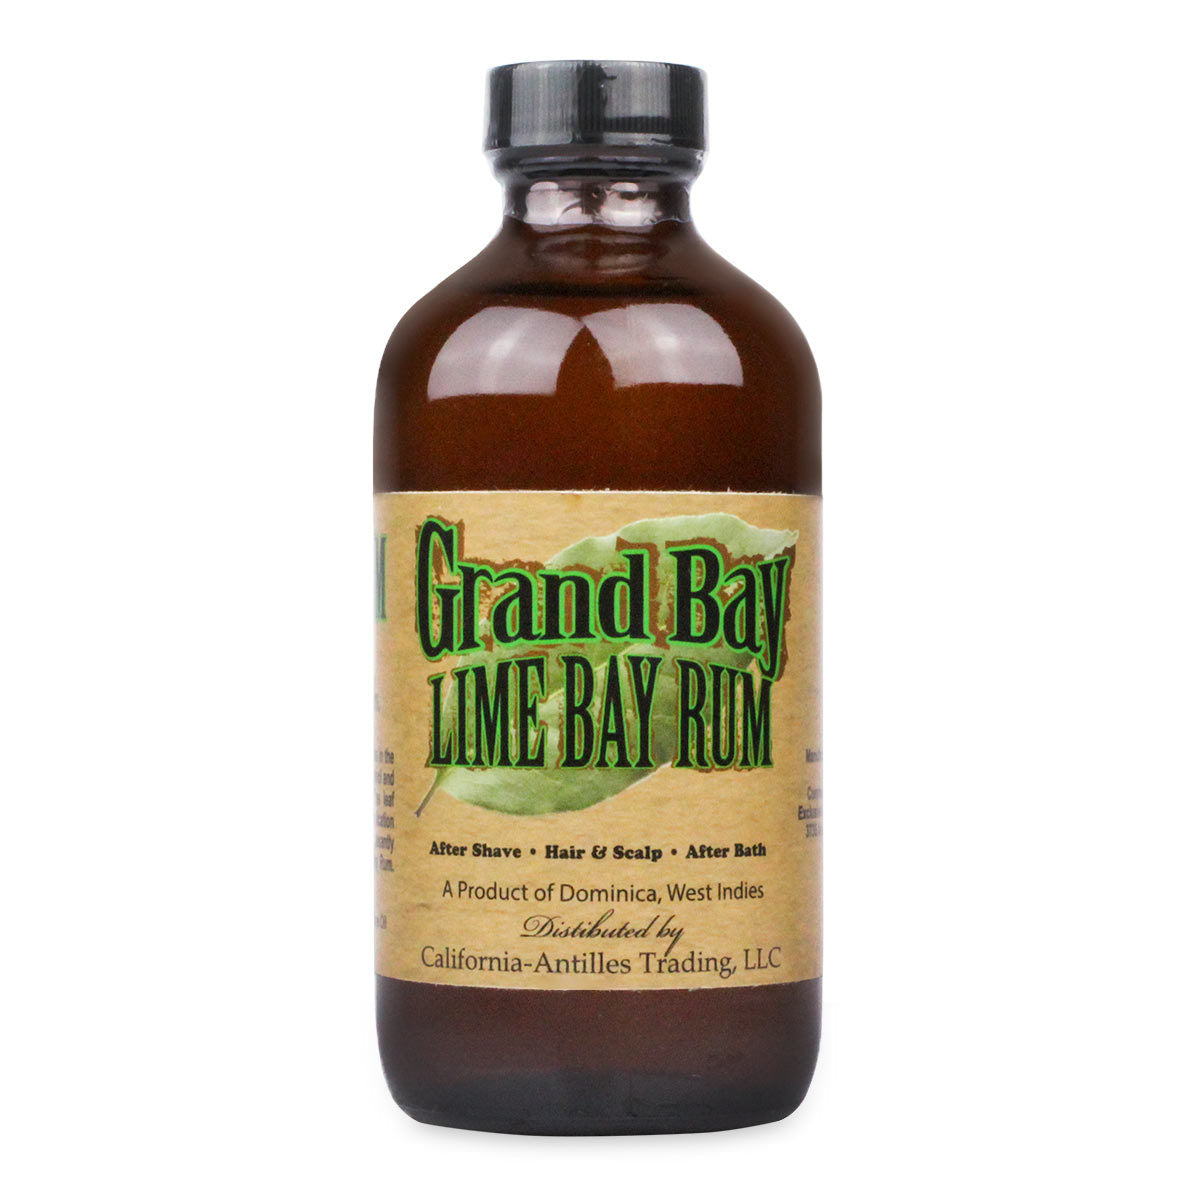 Primary image of Lime Bay Rum Aftershave